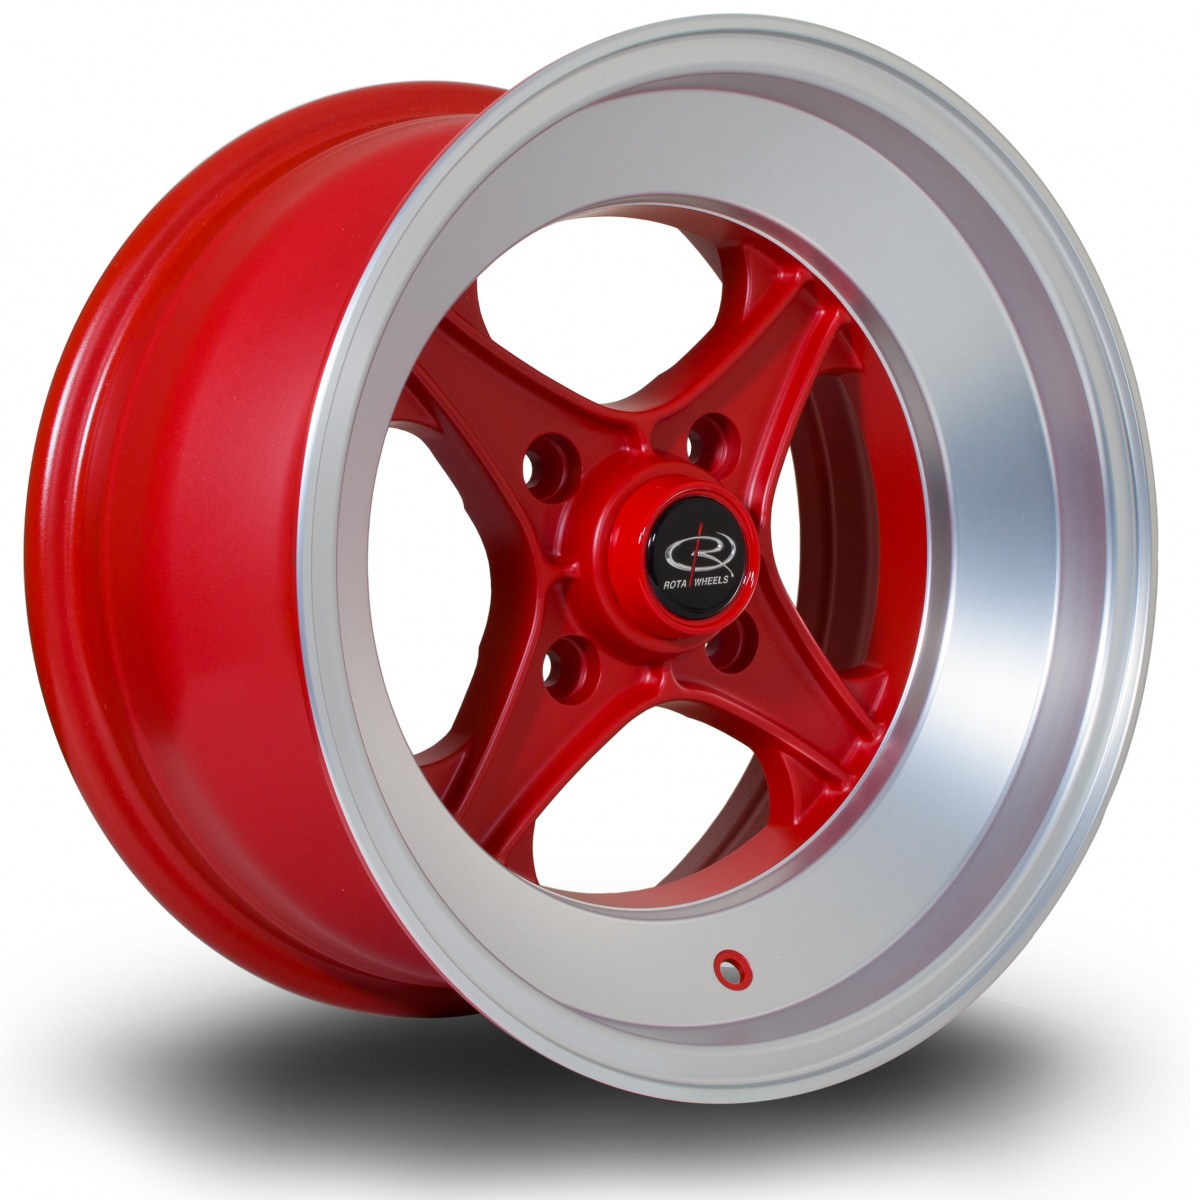 X04 15x8 4x100 ET0 Matte Red with Matte Polished Lip